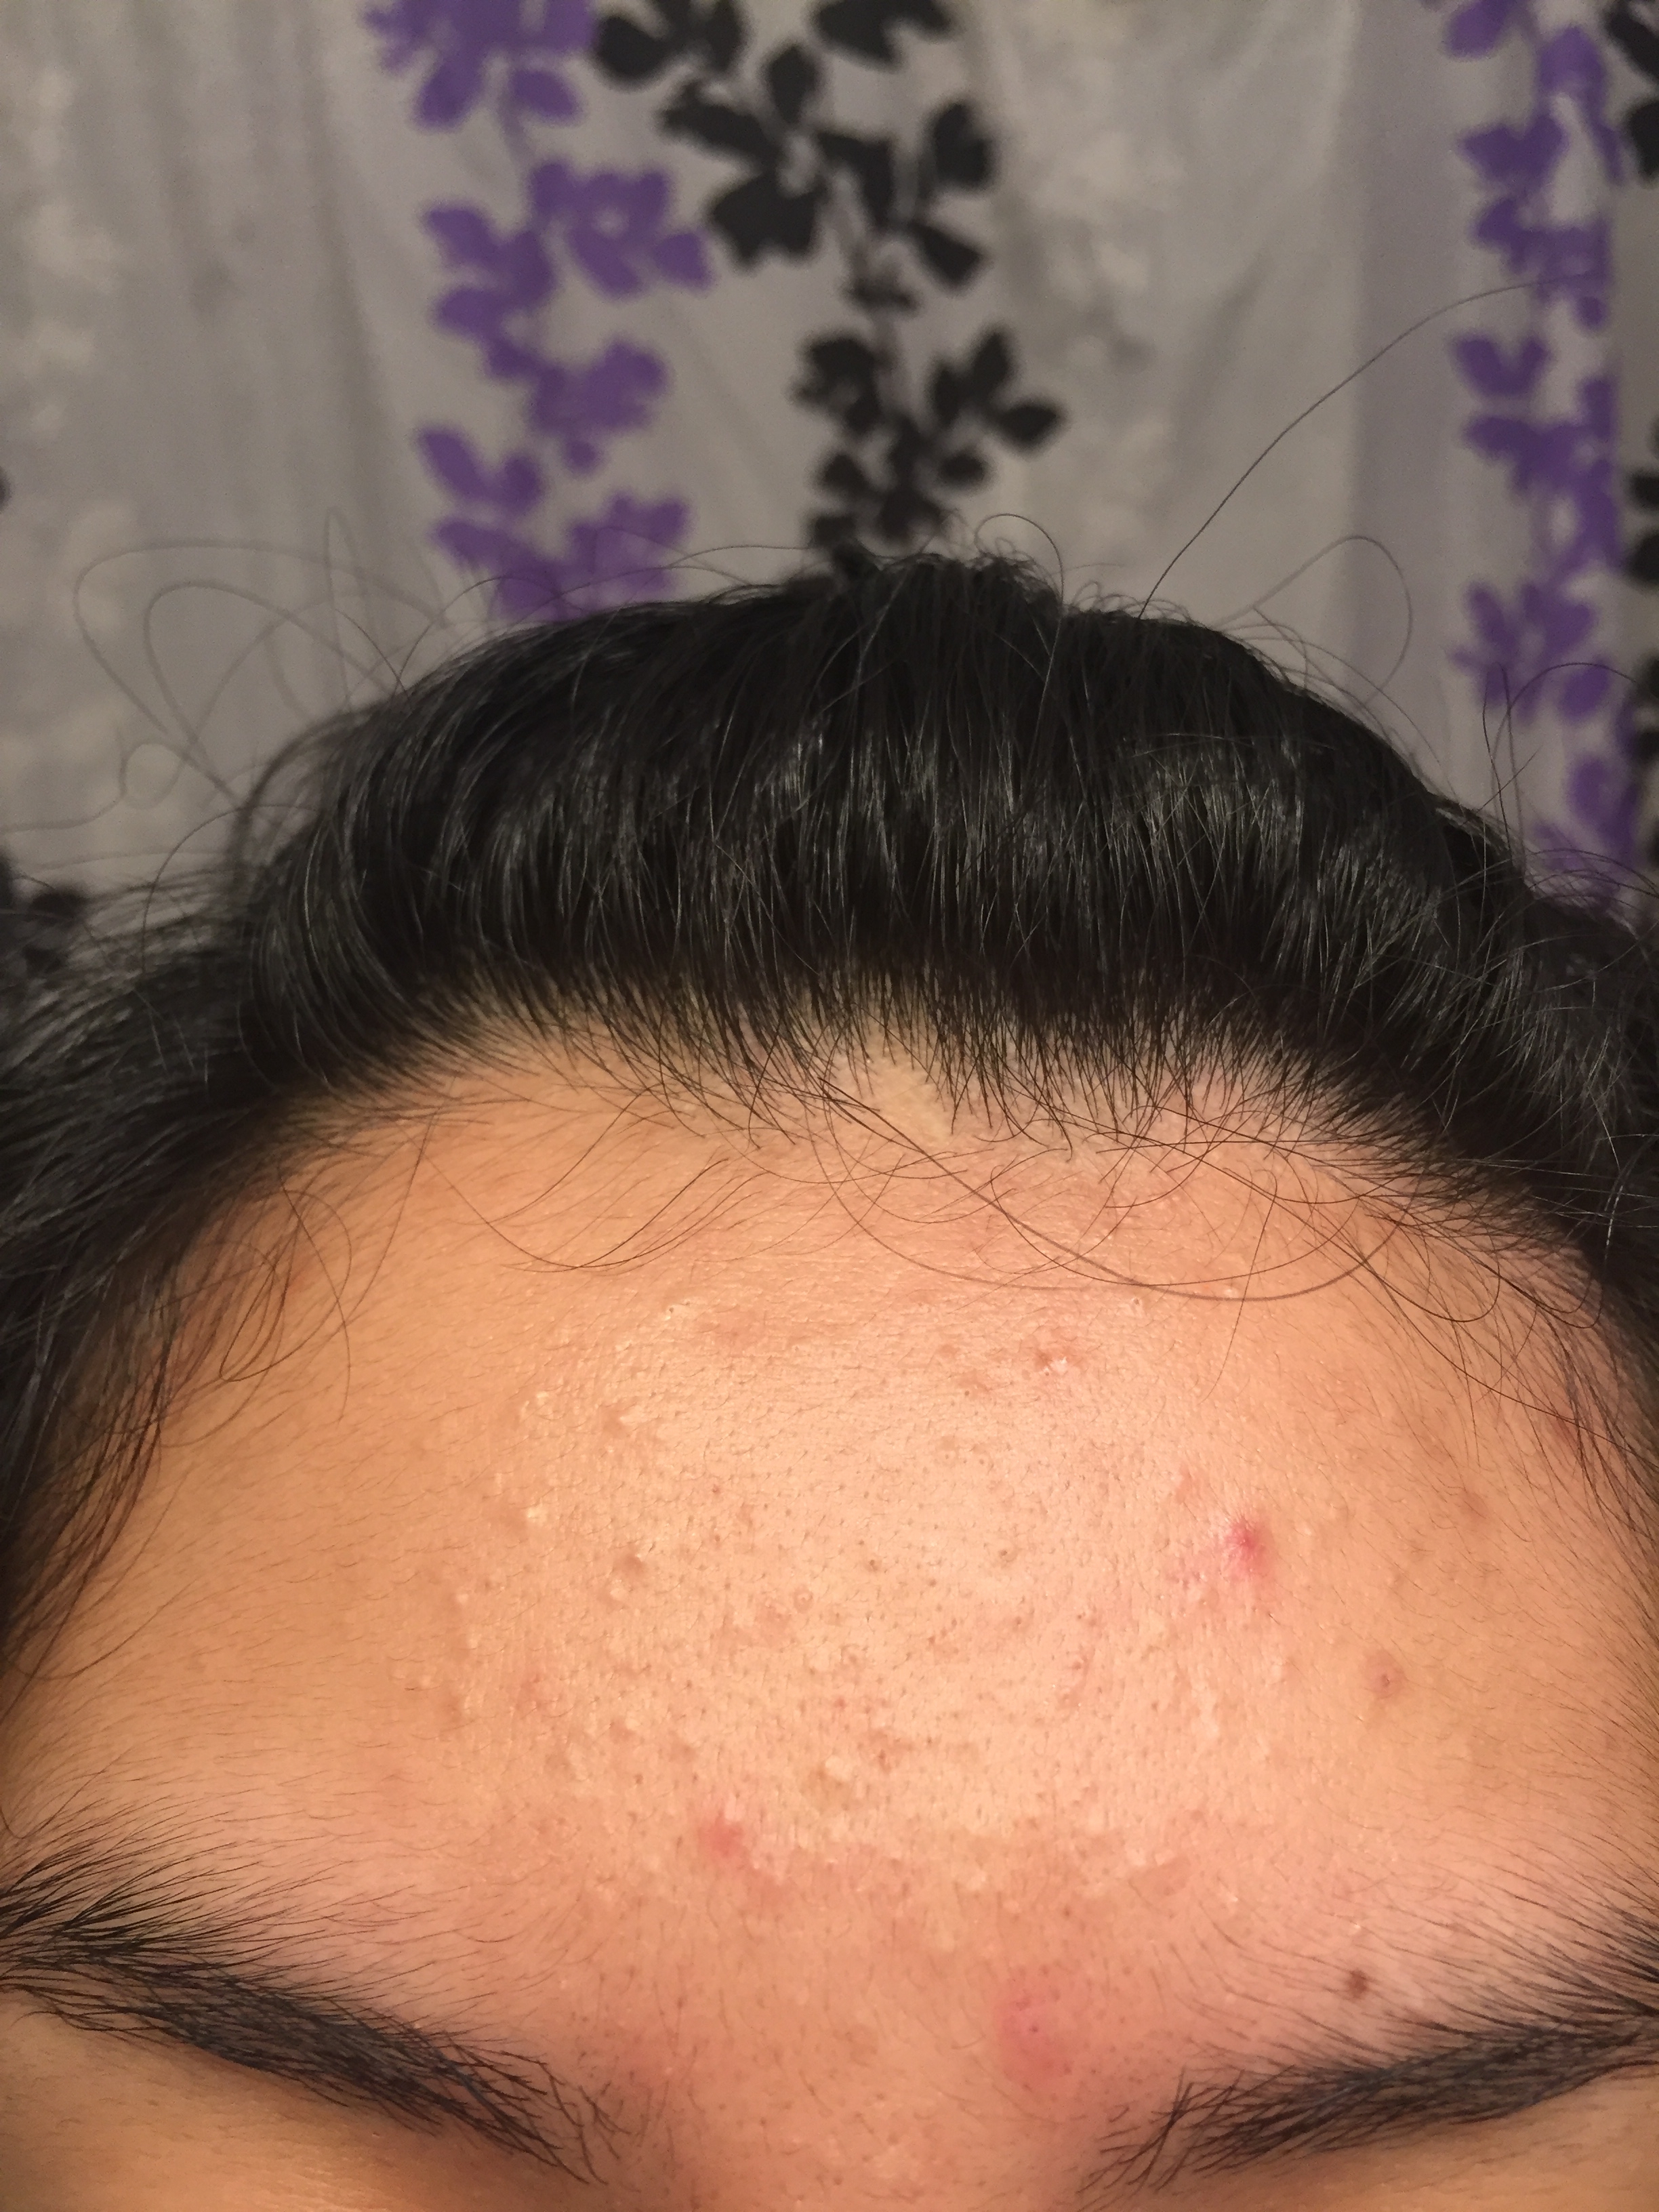 How Do You Get Rid Of Stubborn Closed Comedoneshelp General Acne